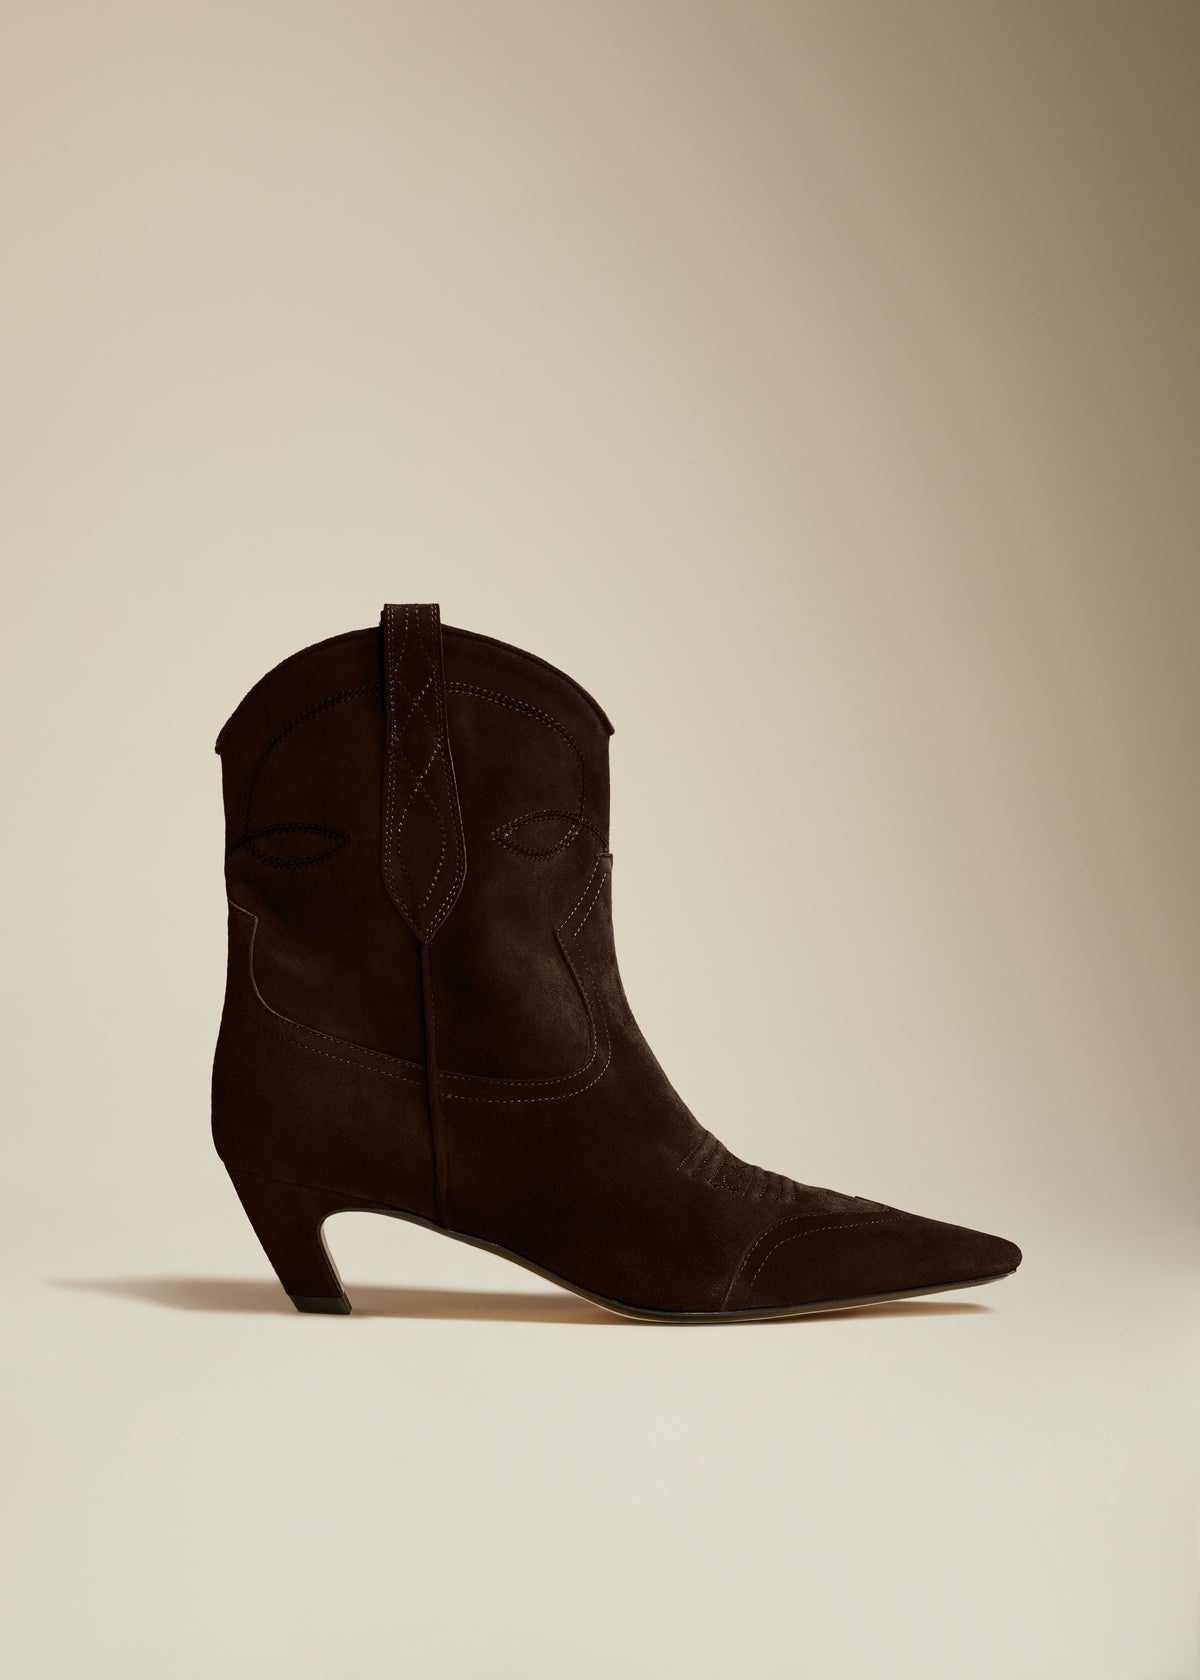 The Dallas Ankle Boot in Coffee Suede - 1